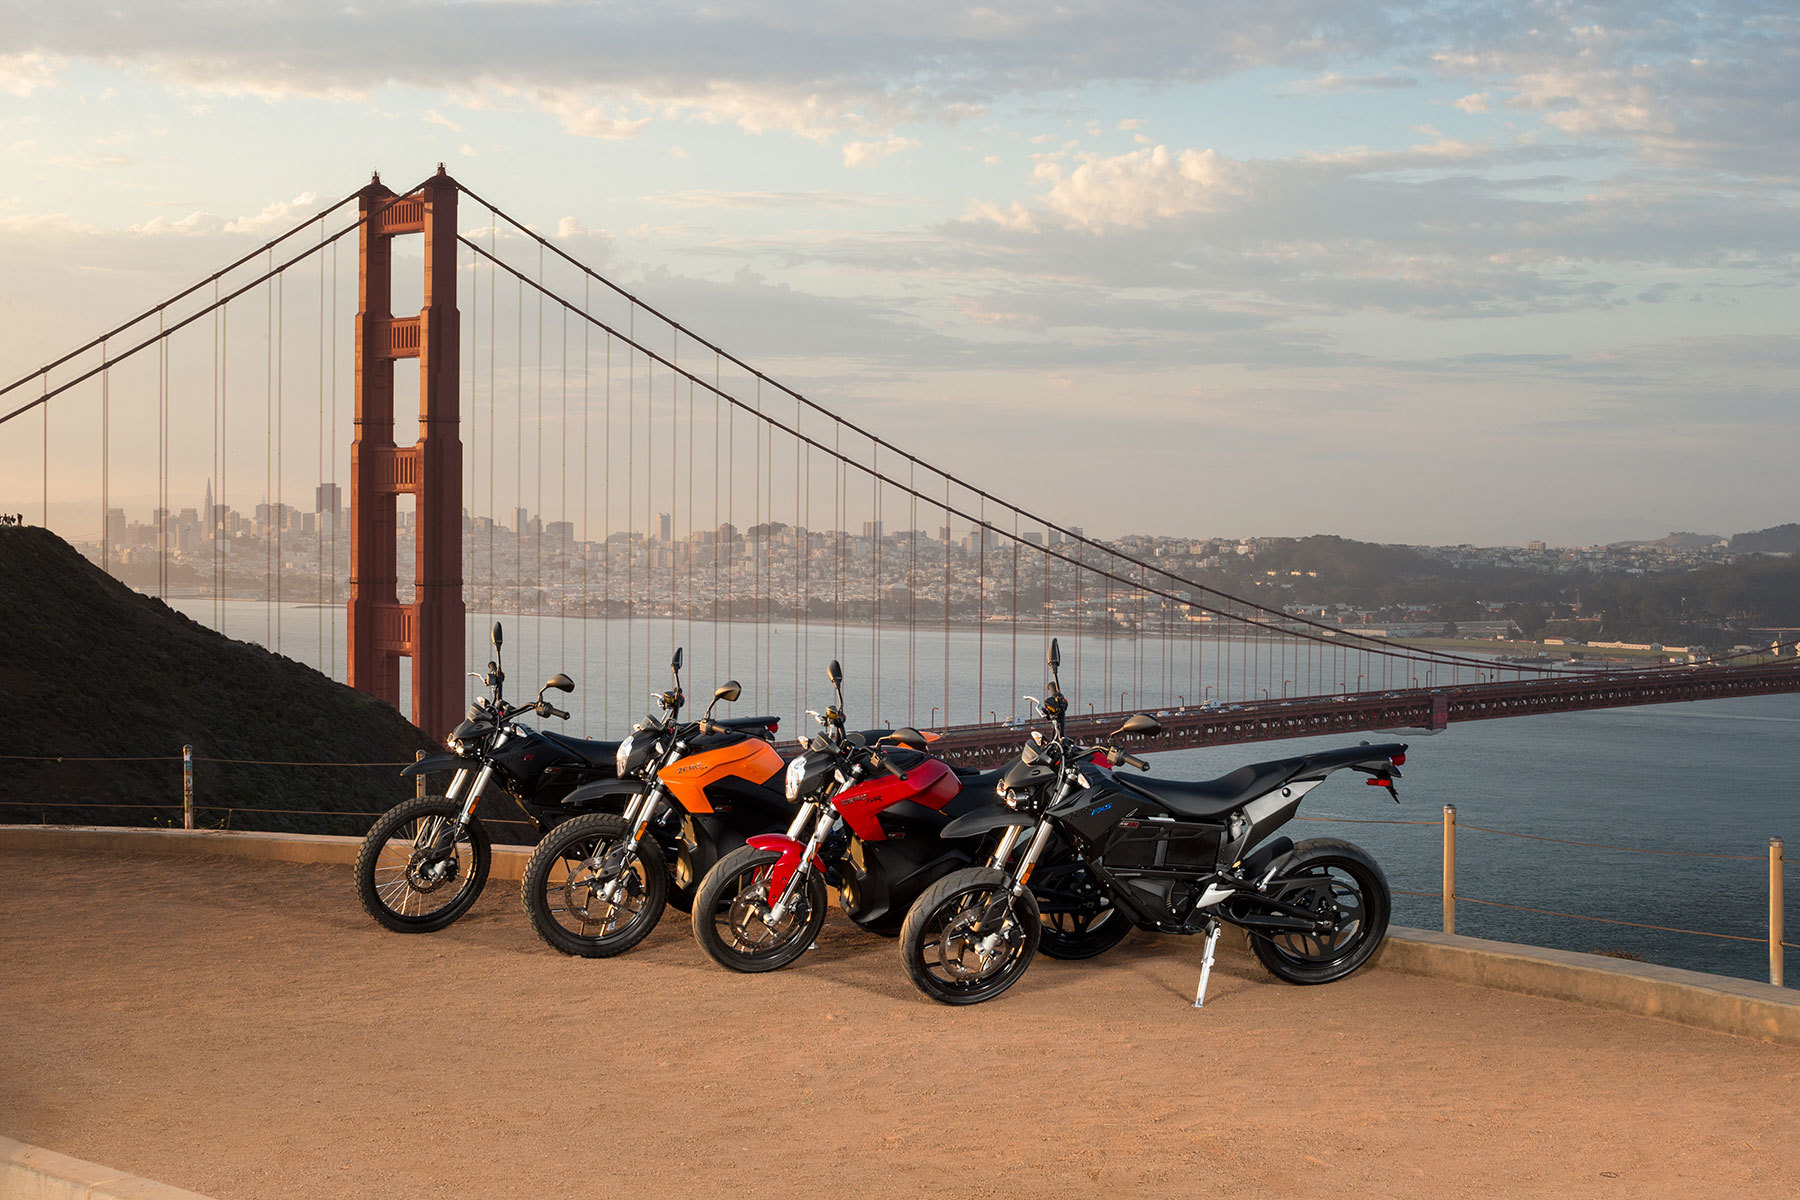 at-last-minute-congress-keeps-electric-motorcycle-tax-credits-autoblog